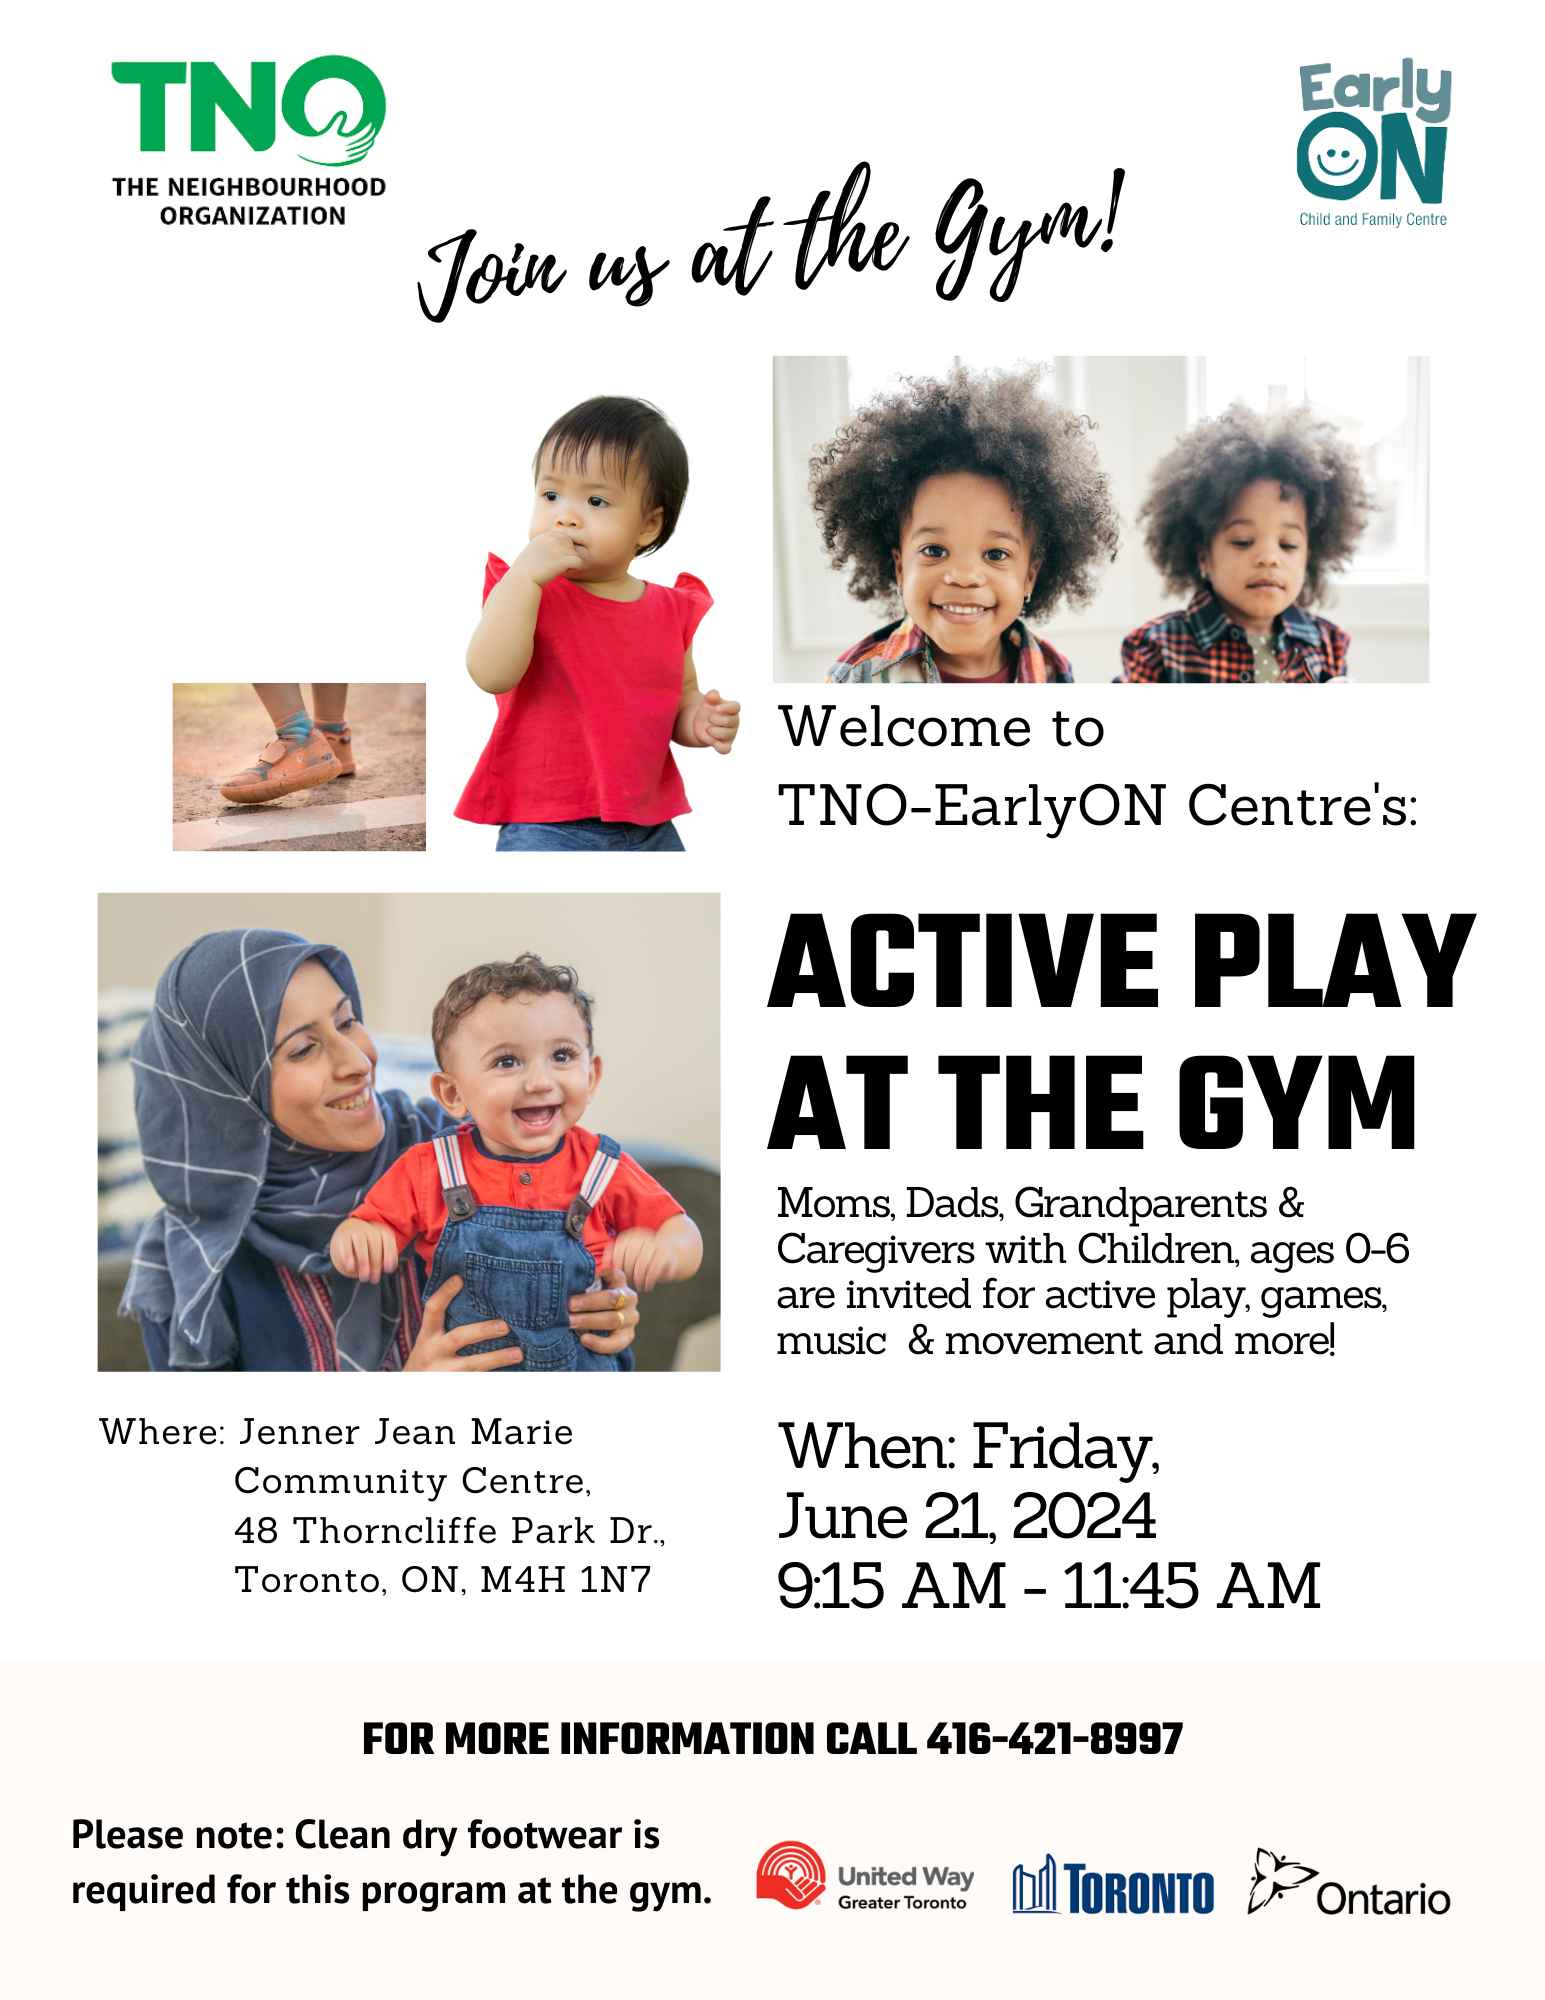 Active Play @ the Gym - June 21